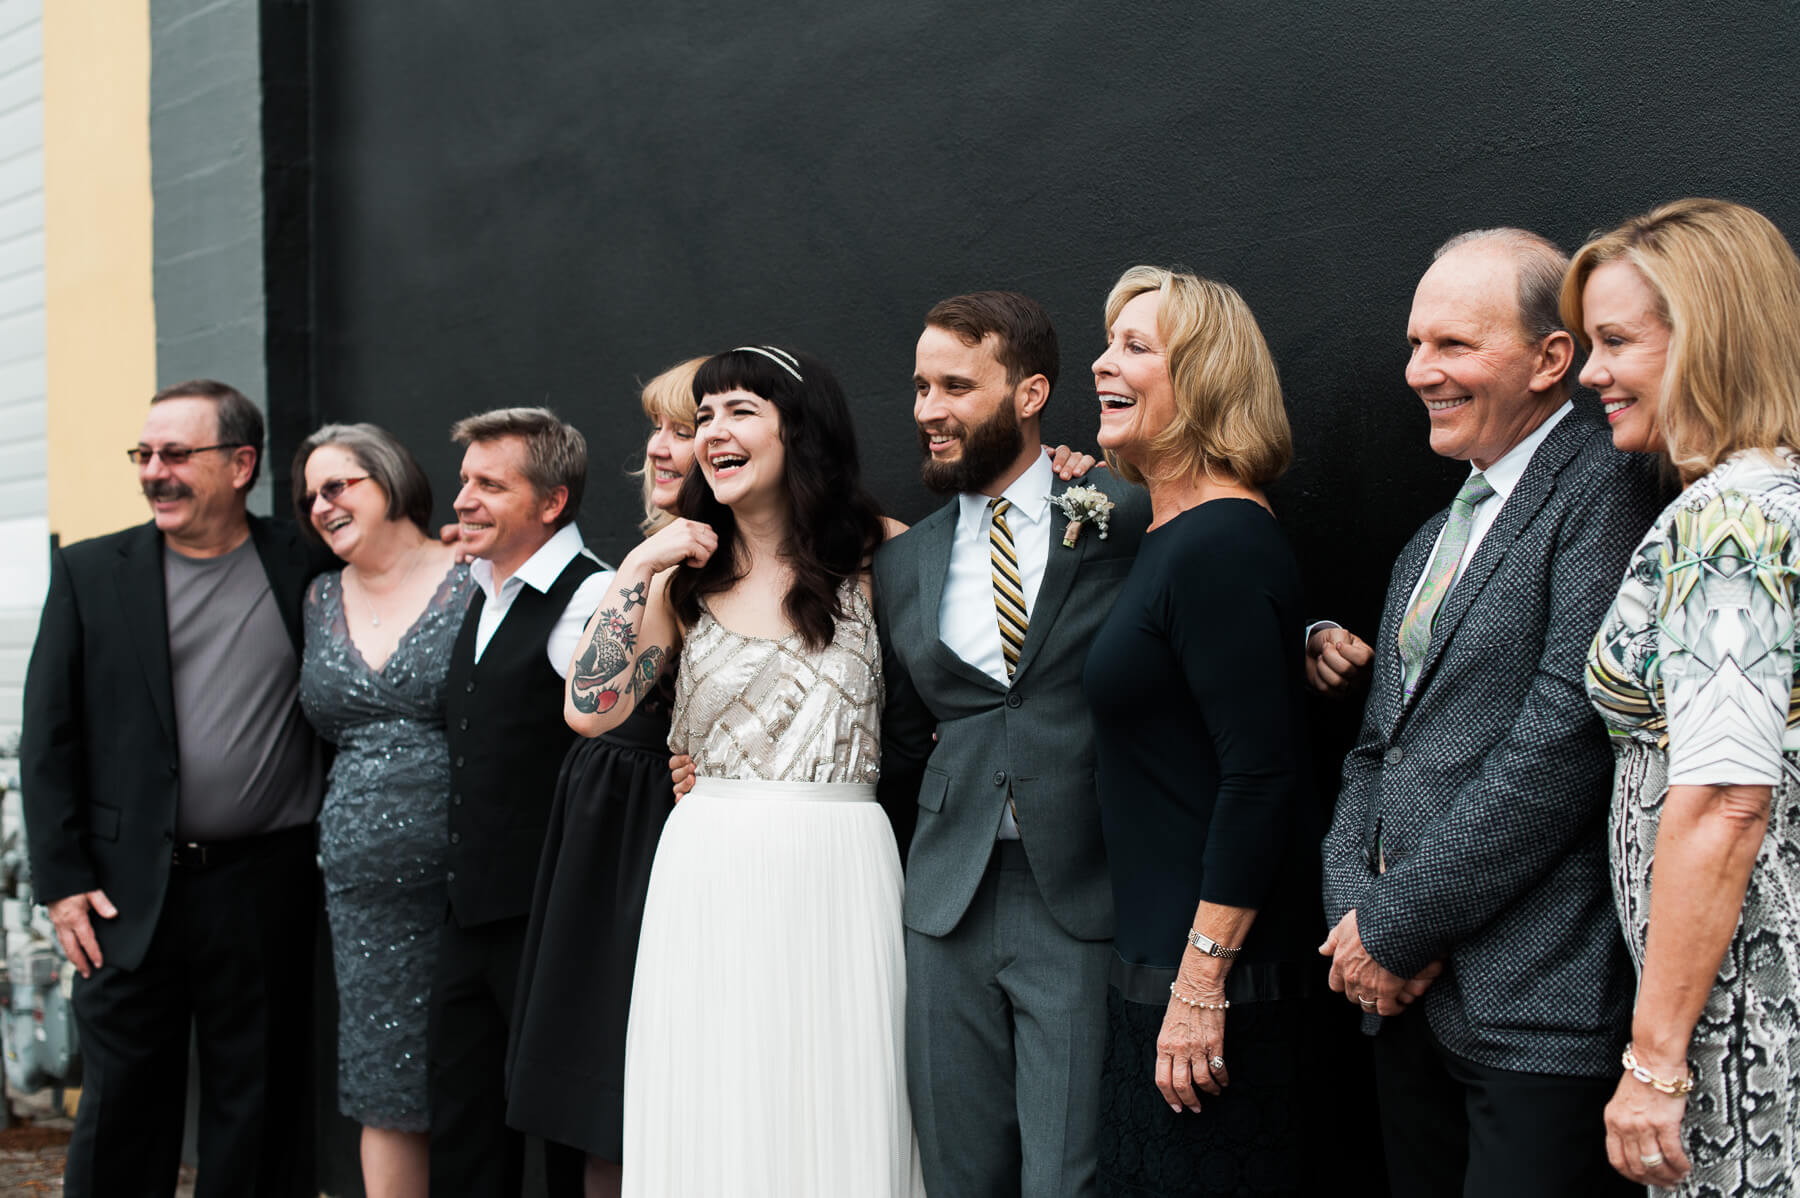 Lots of laughter during family photographs at a Portland, Oregon wedding. By Portland Holocene Wedding Photographer Briana Morrison